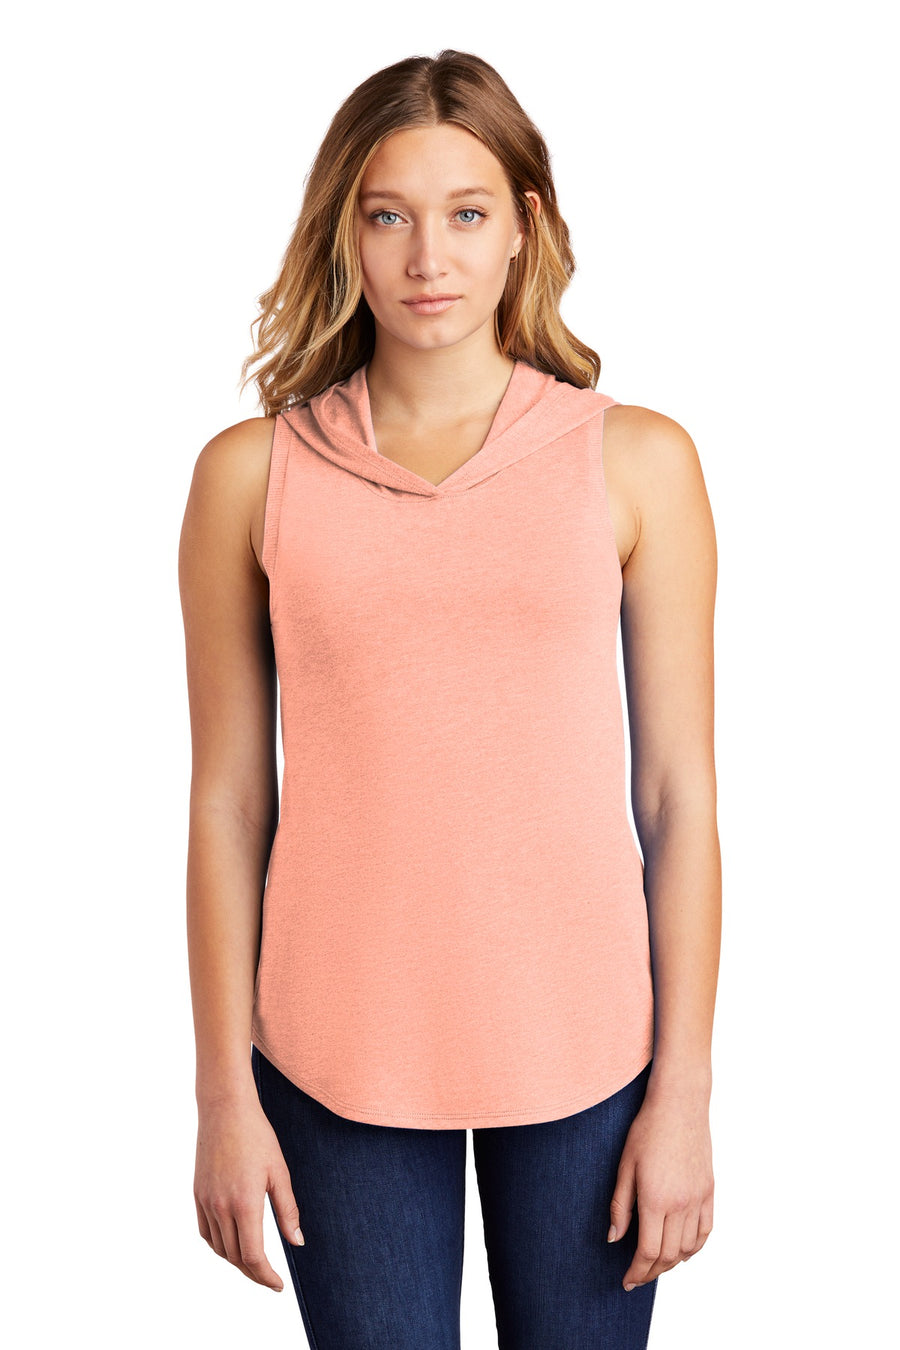 DT1375-Heathered Dusty Peach-front_model